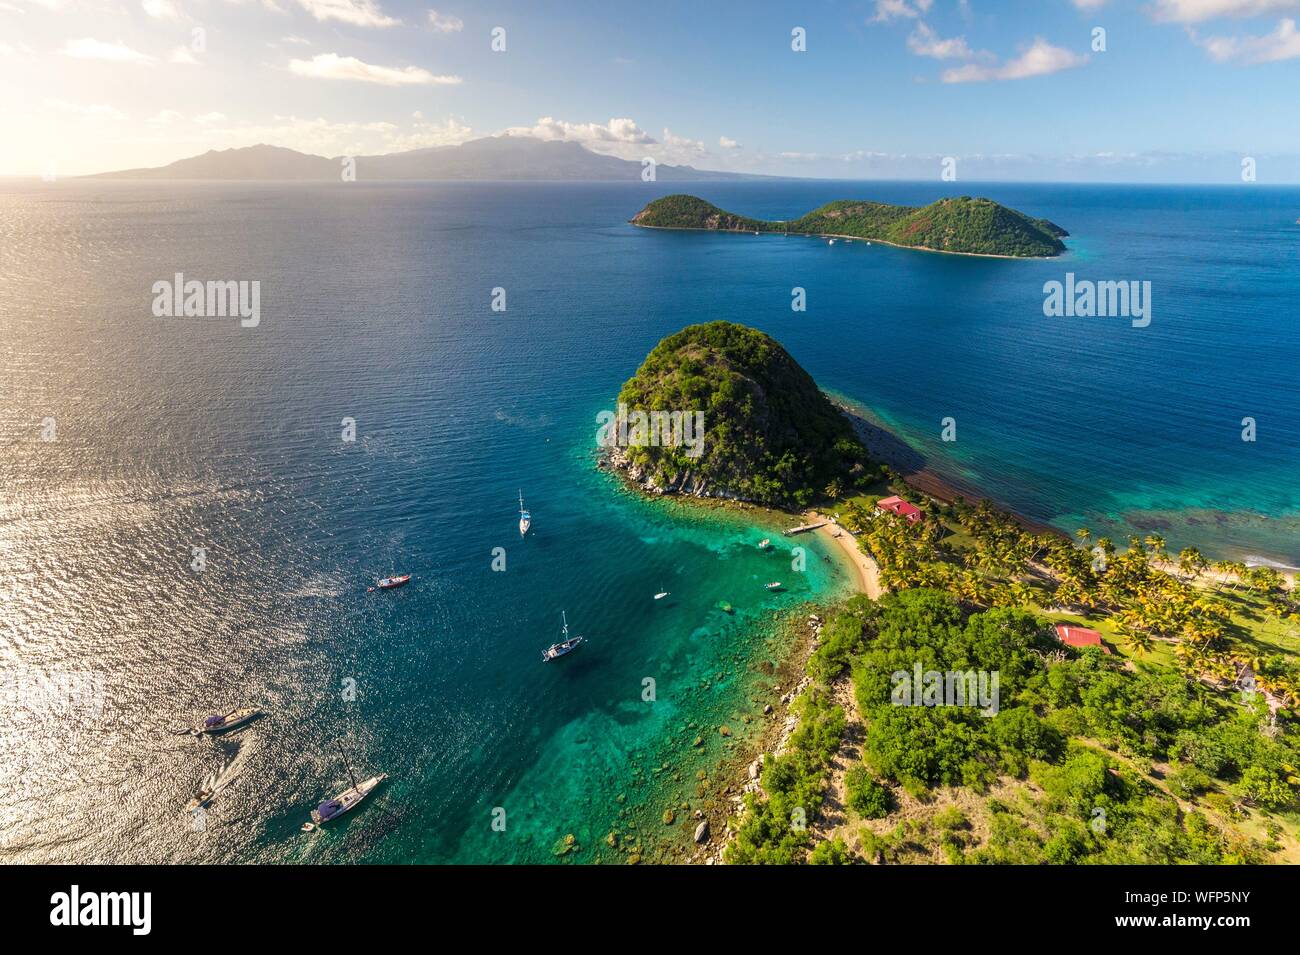 Guadeloupe, Les Saintes, Terre de Haut, the bay of the town of Terre de Haut, listed by UNESCO among the 10 most beautiful bays in the world, here the Pain de Sucre, Basse Terre in background (aerial view) Stock Photo